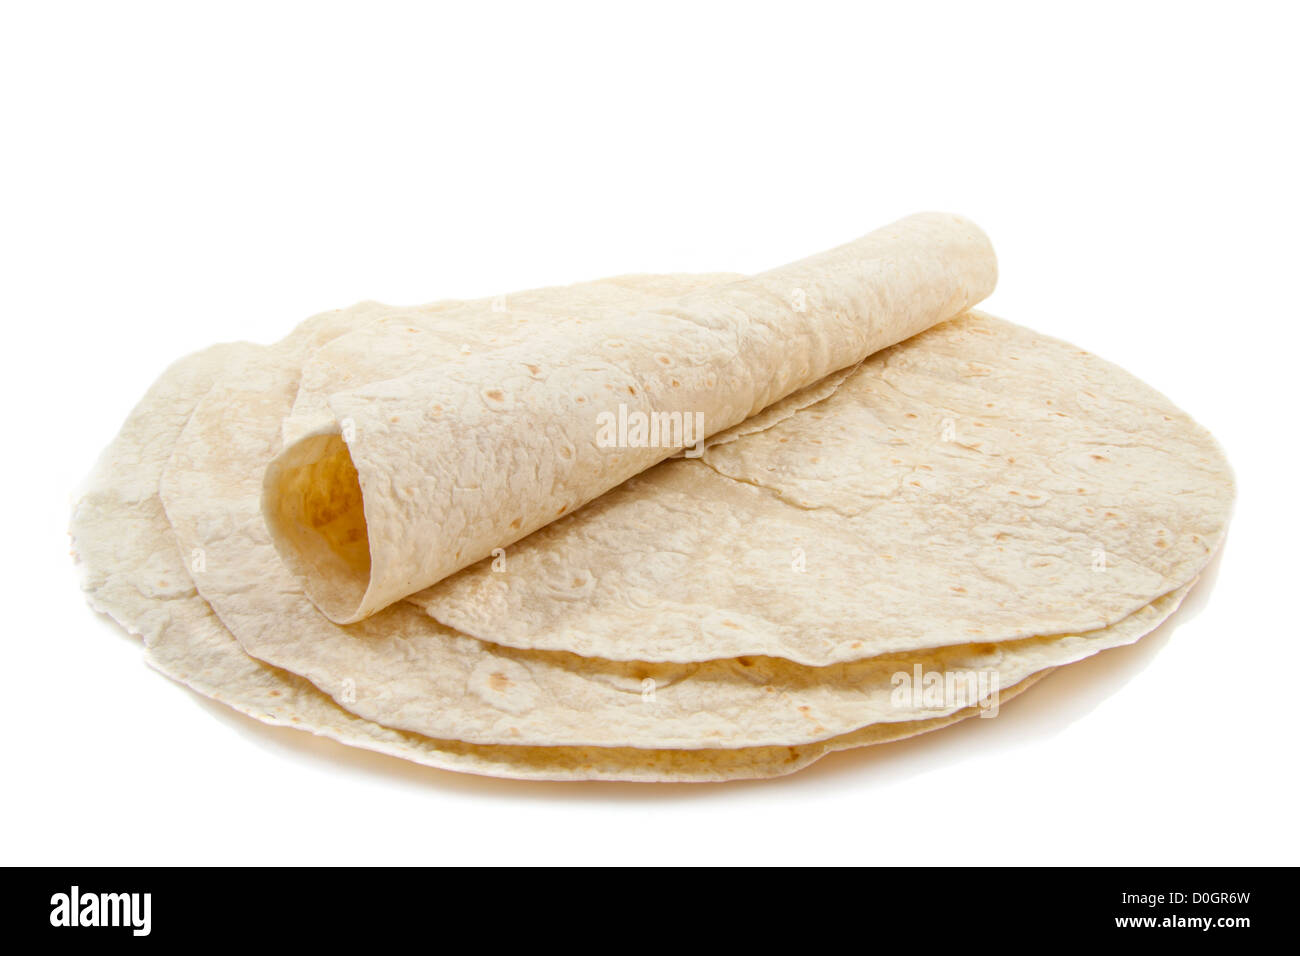 Tortilla pan cakes isolated on a white background Stock Photo